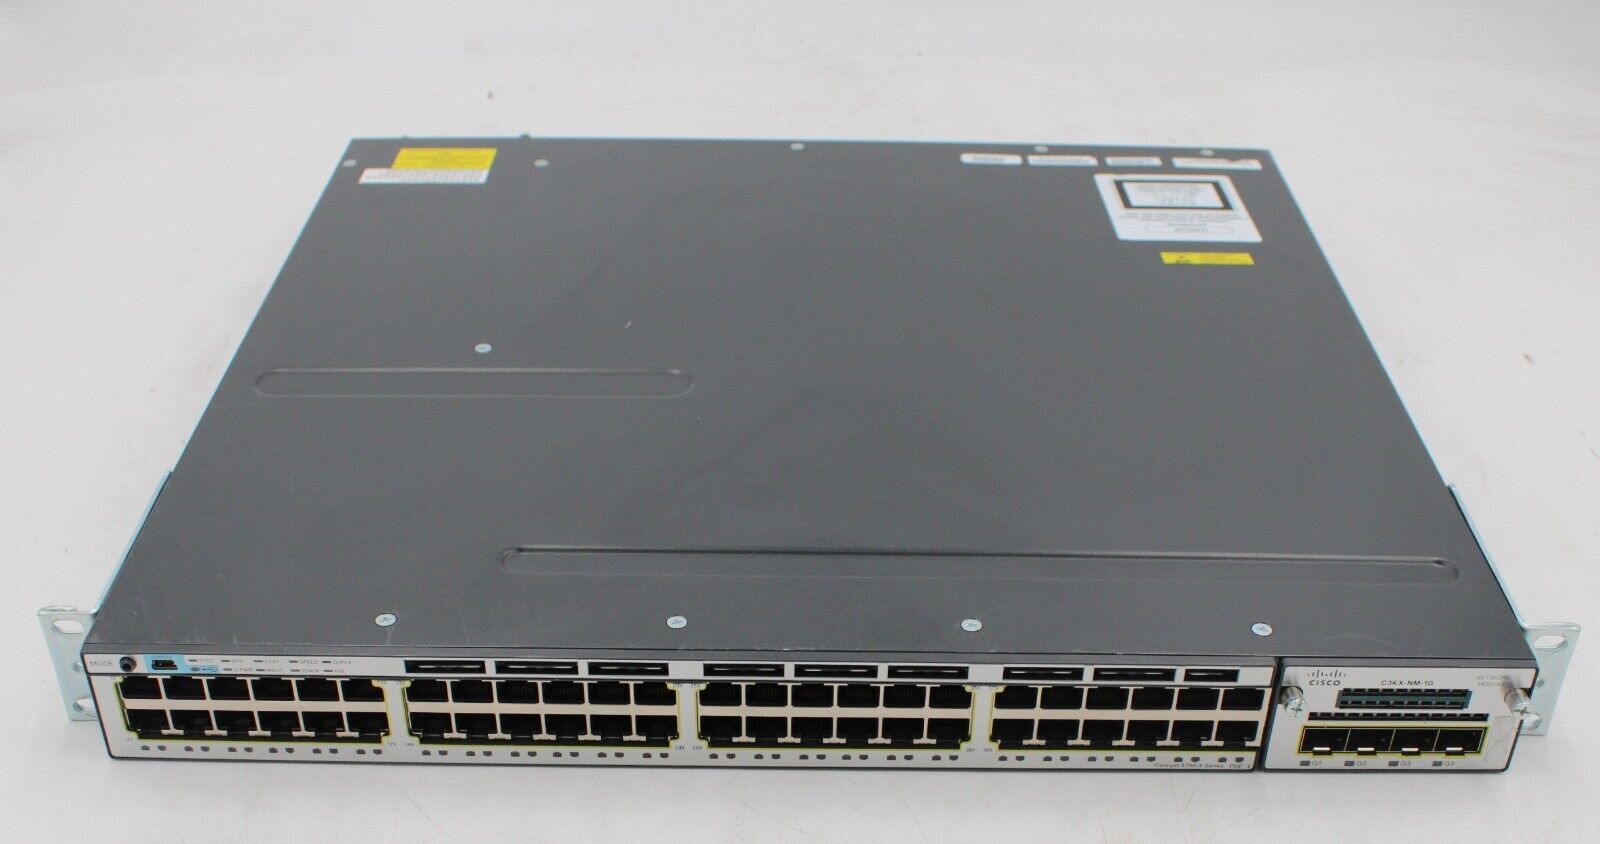 Cisco Catalyst WS-C3750X-48P-S Gigabit Ethernet Network Switch Managed TESTED